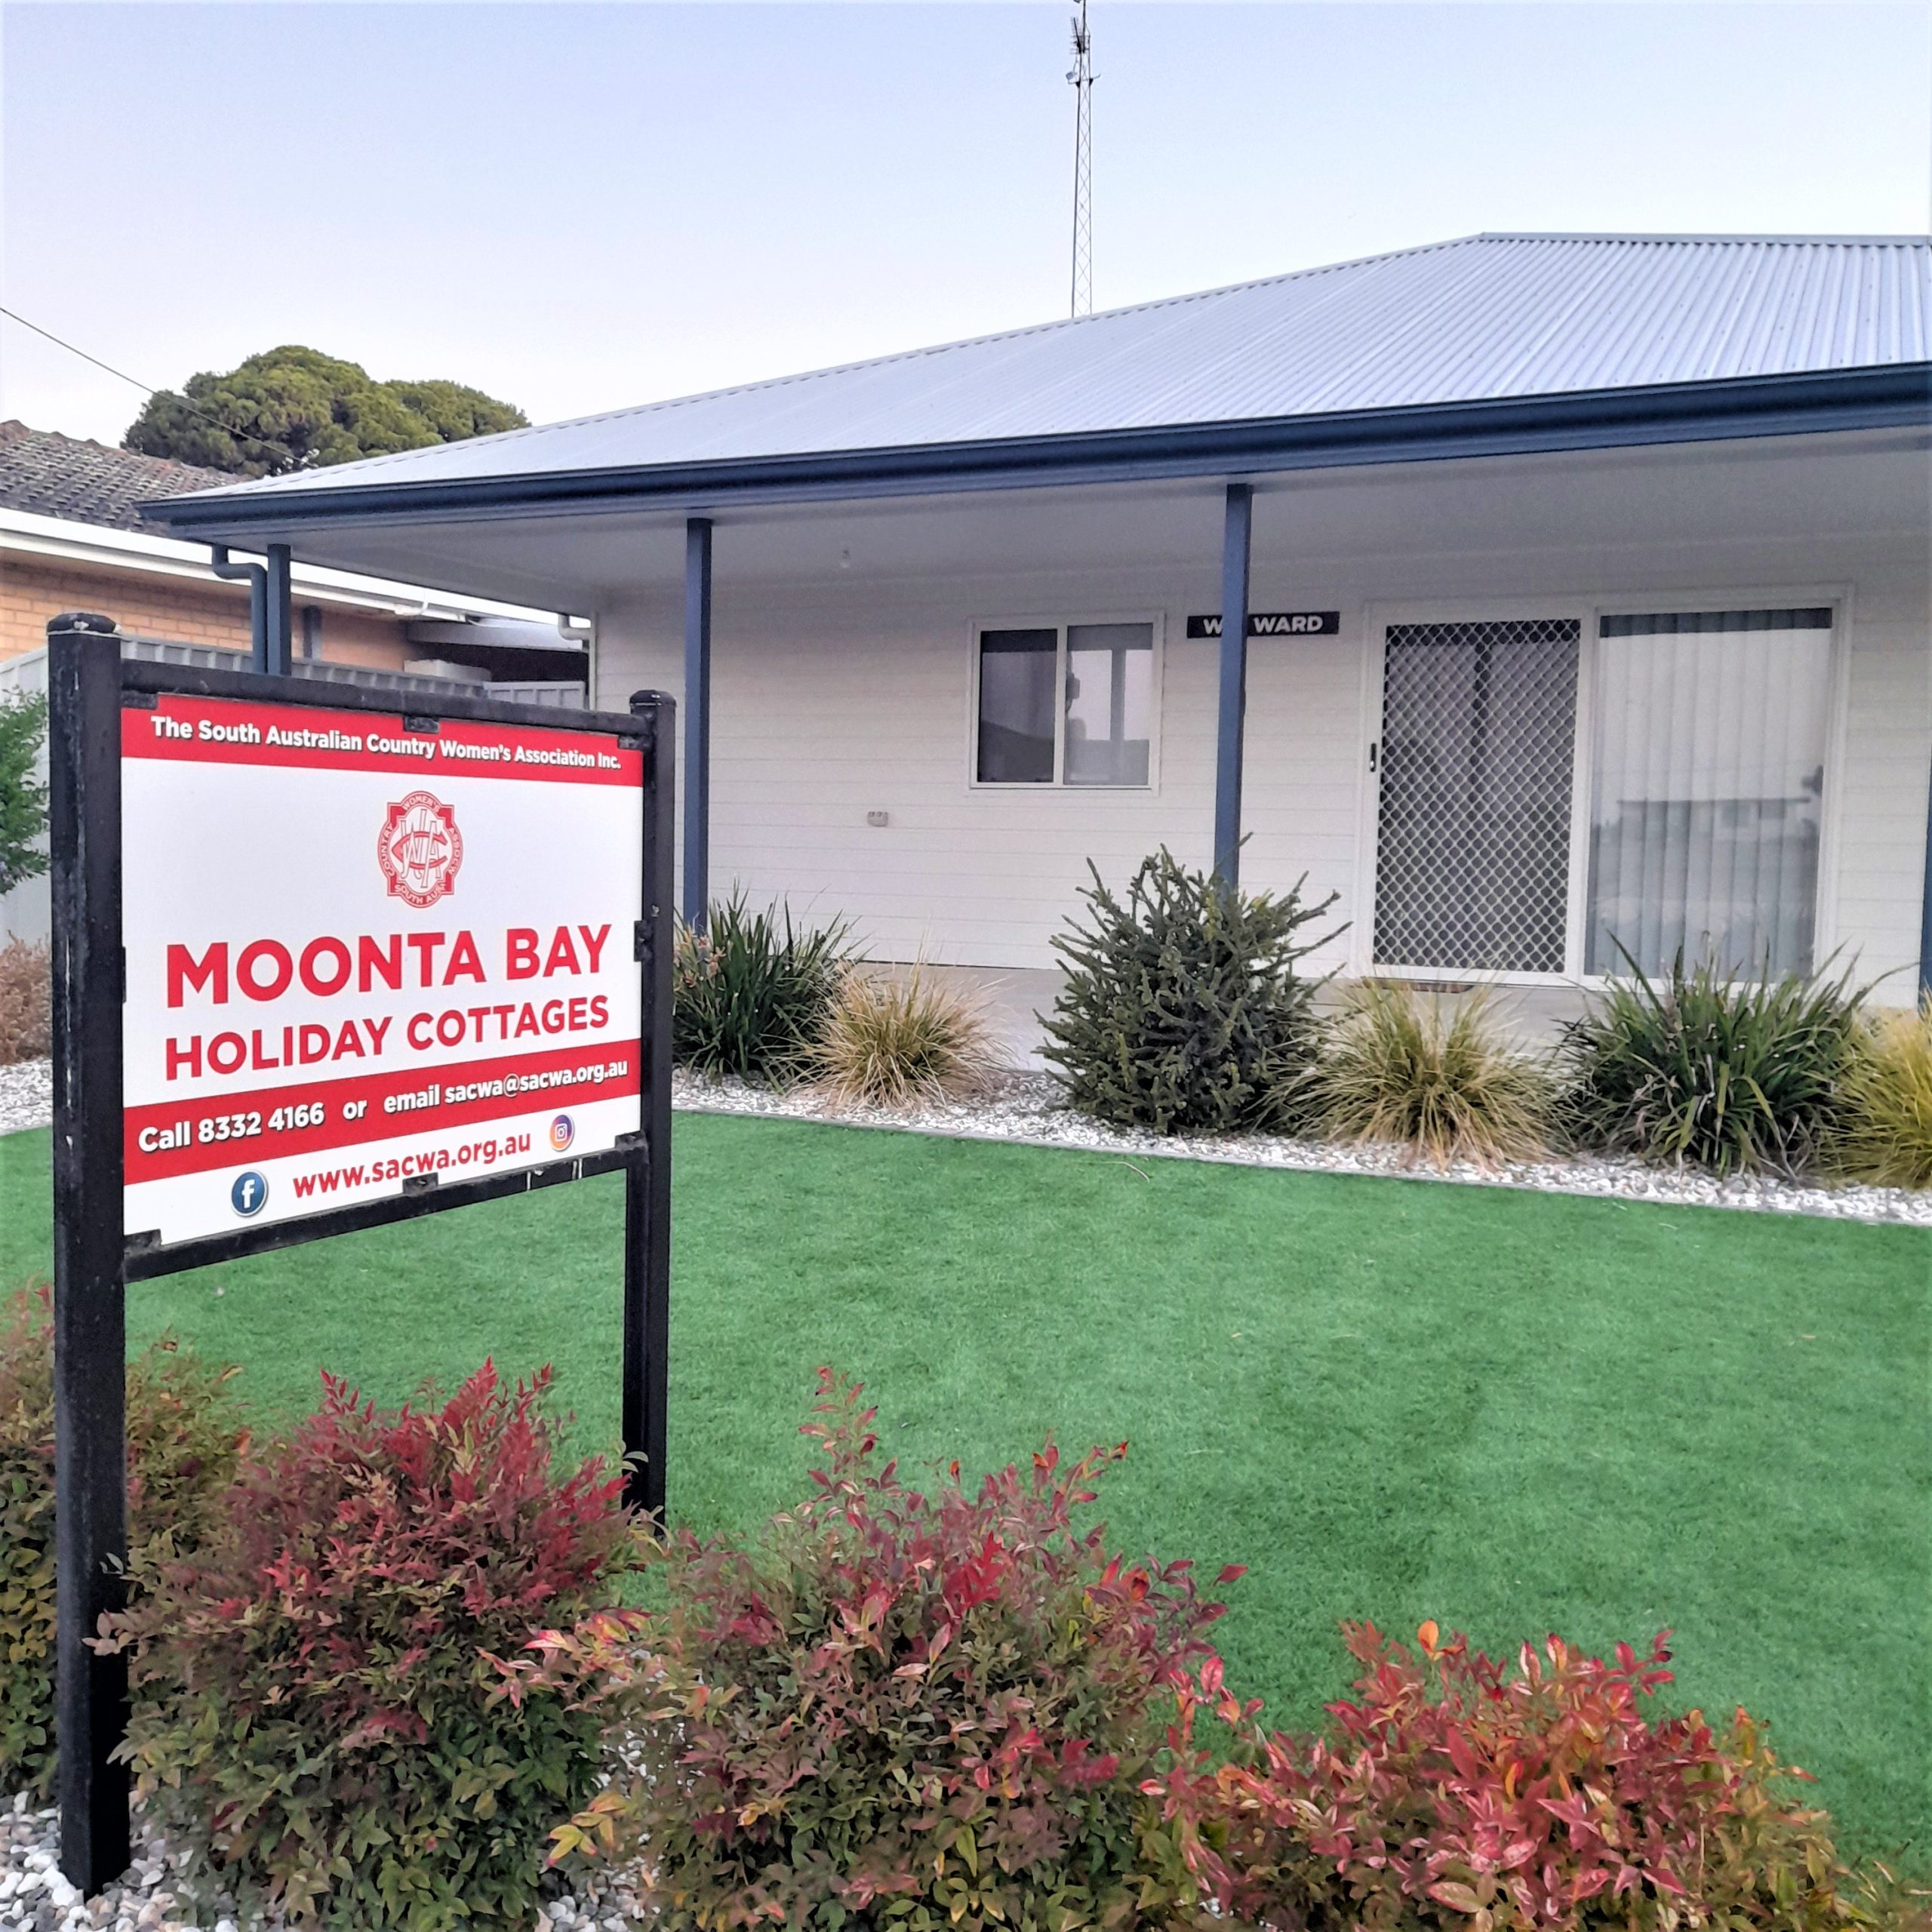 Moonta Bay Holiday Cottages